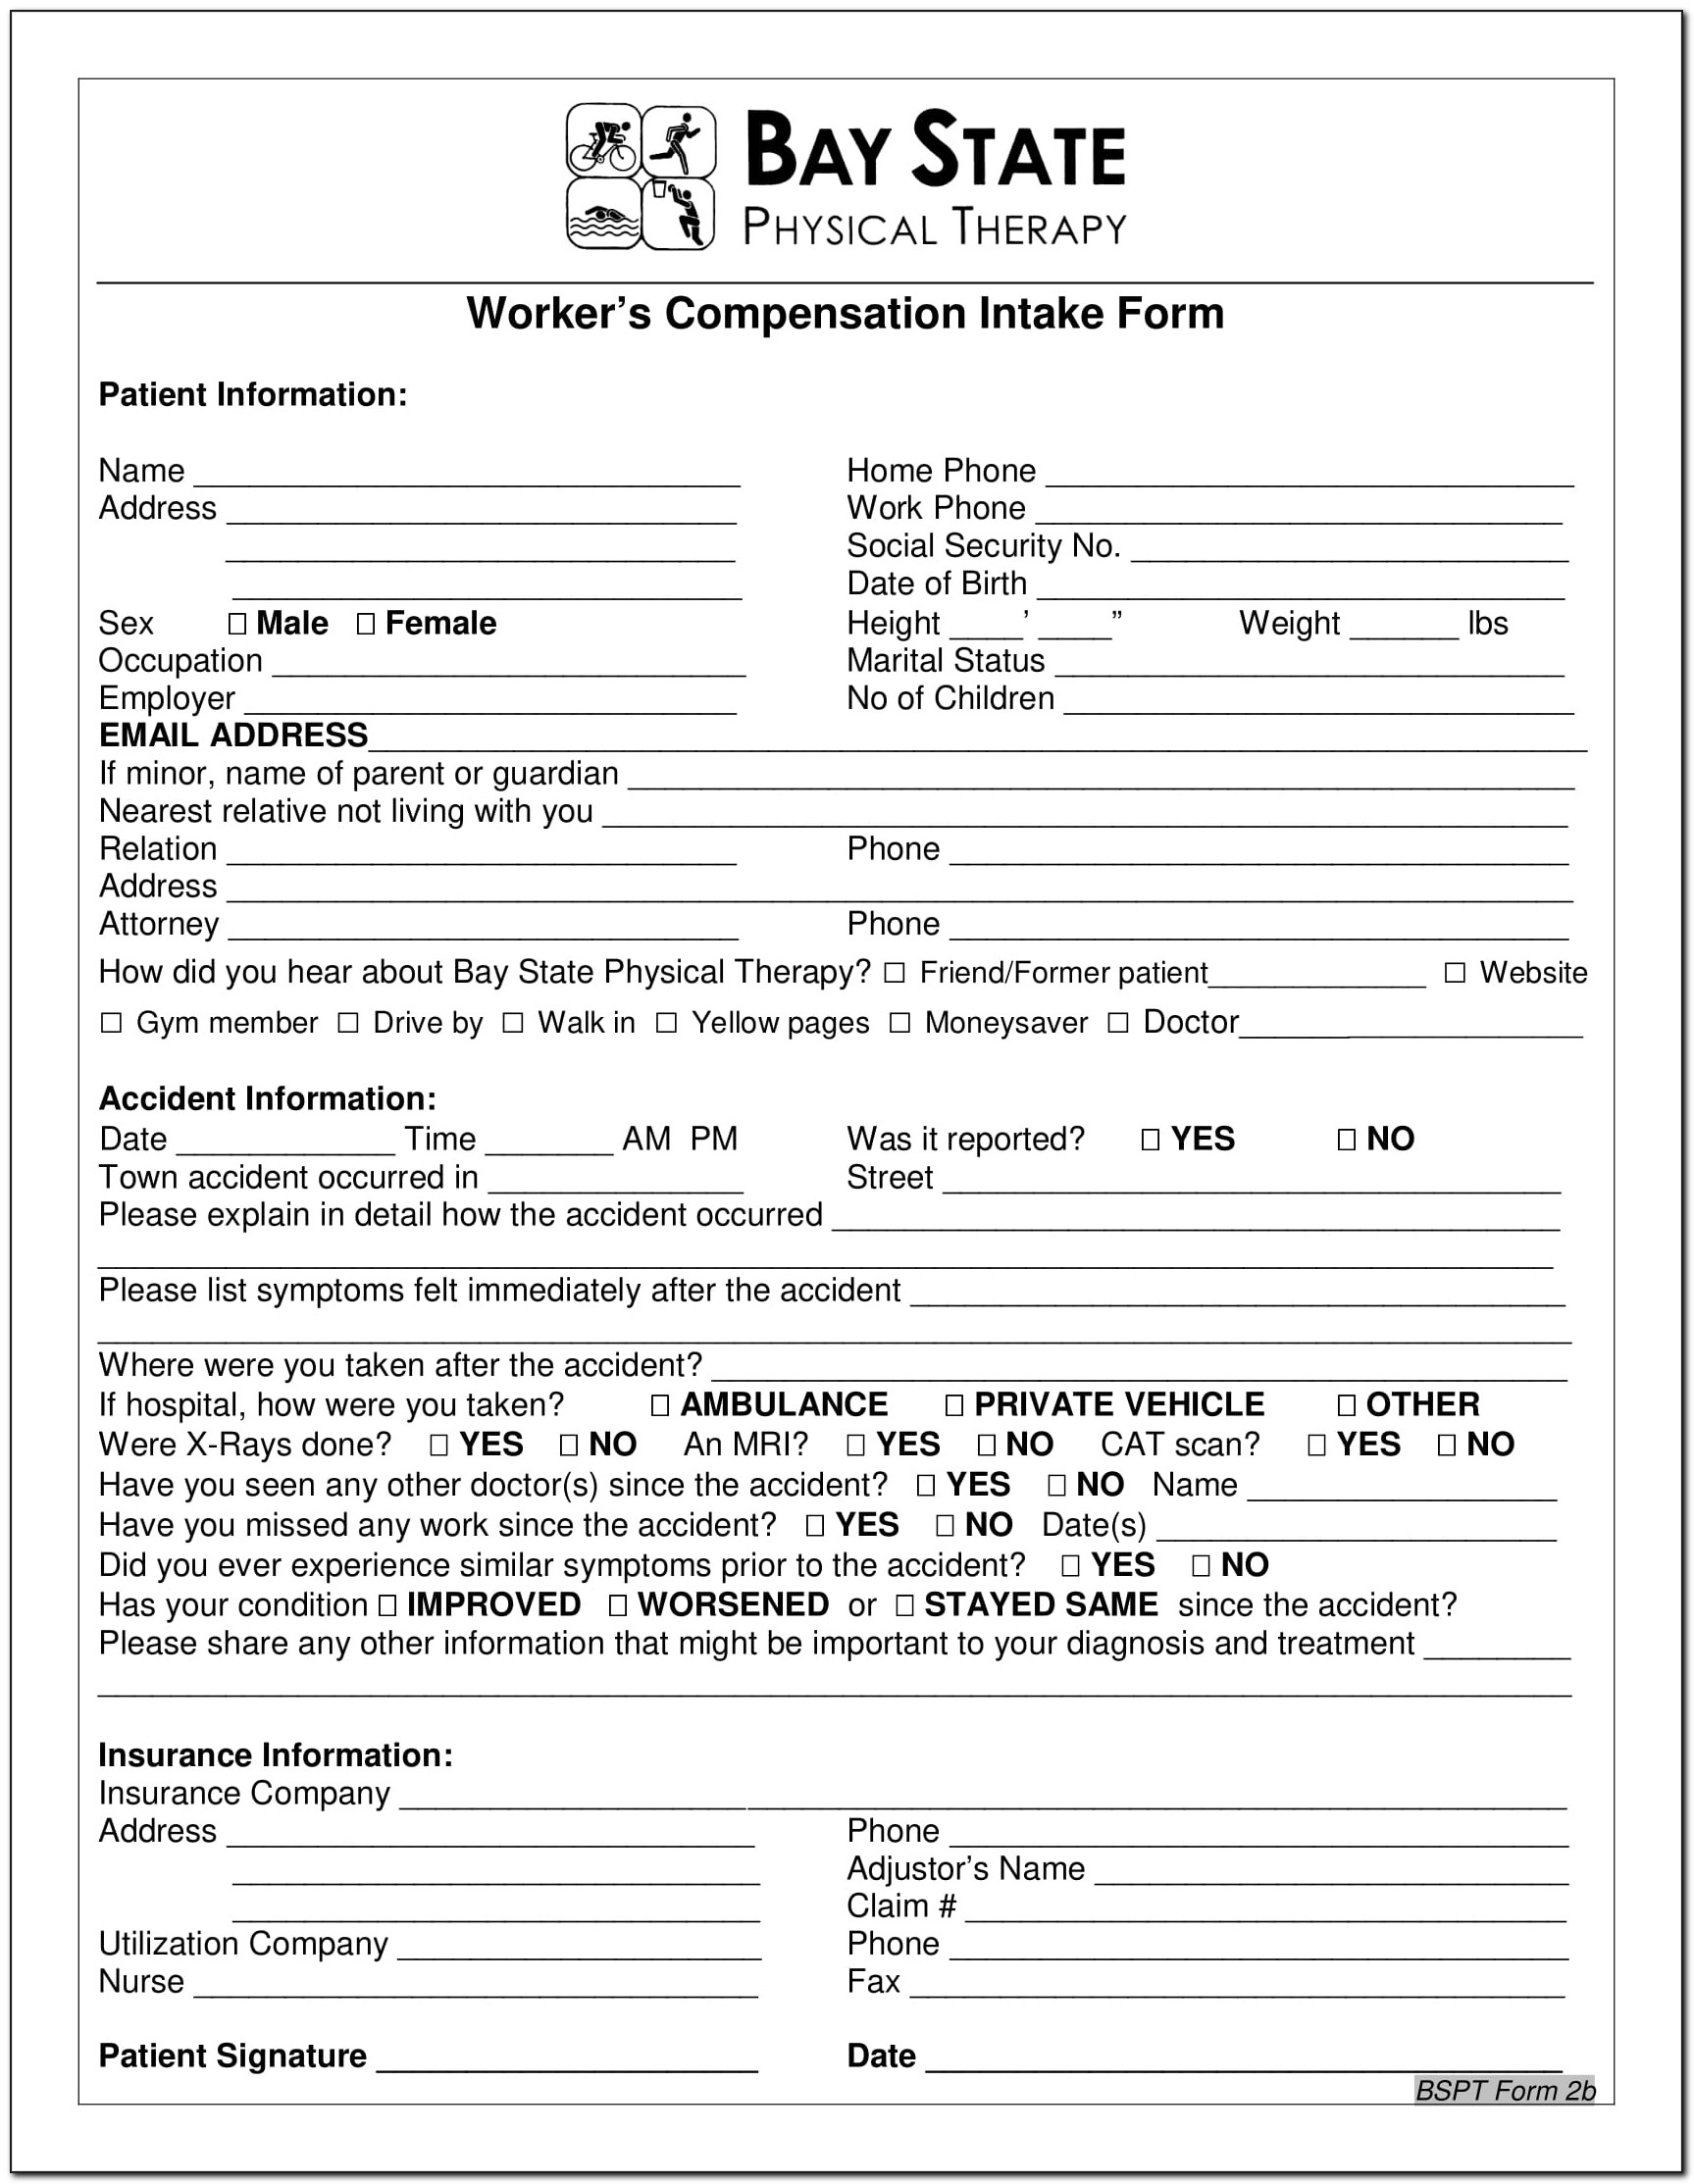 Workers Compensation Patient Intake Form